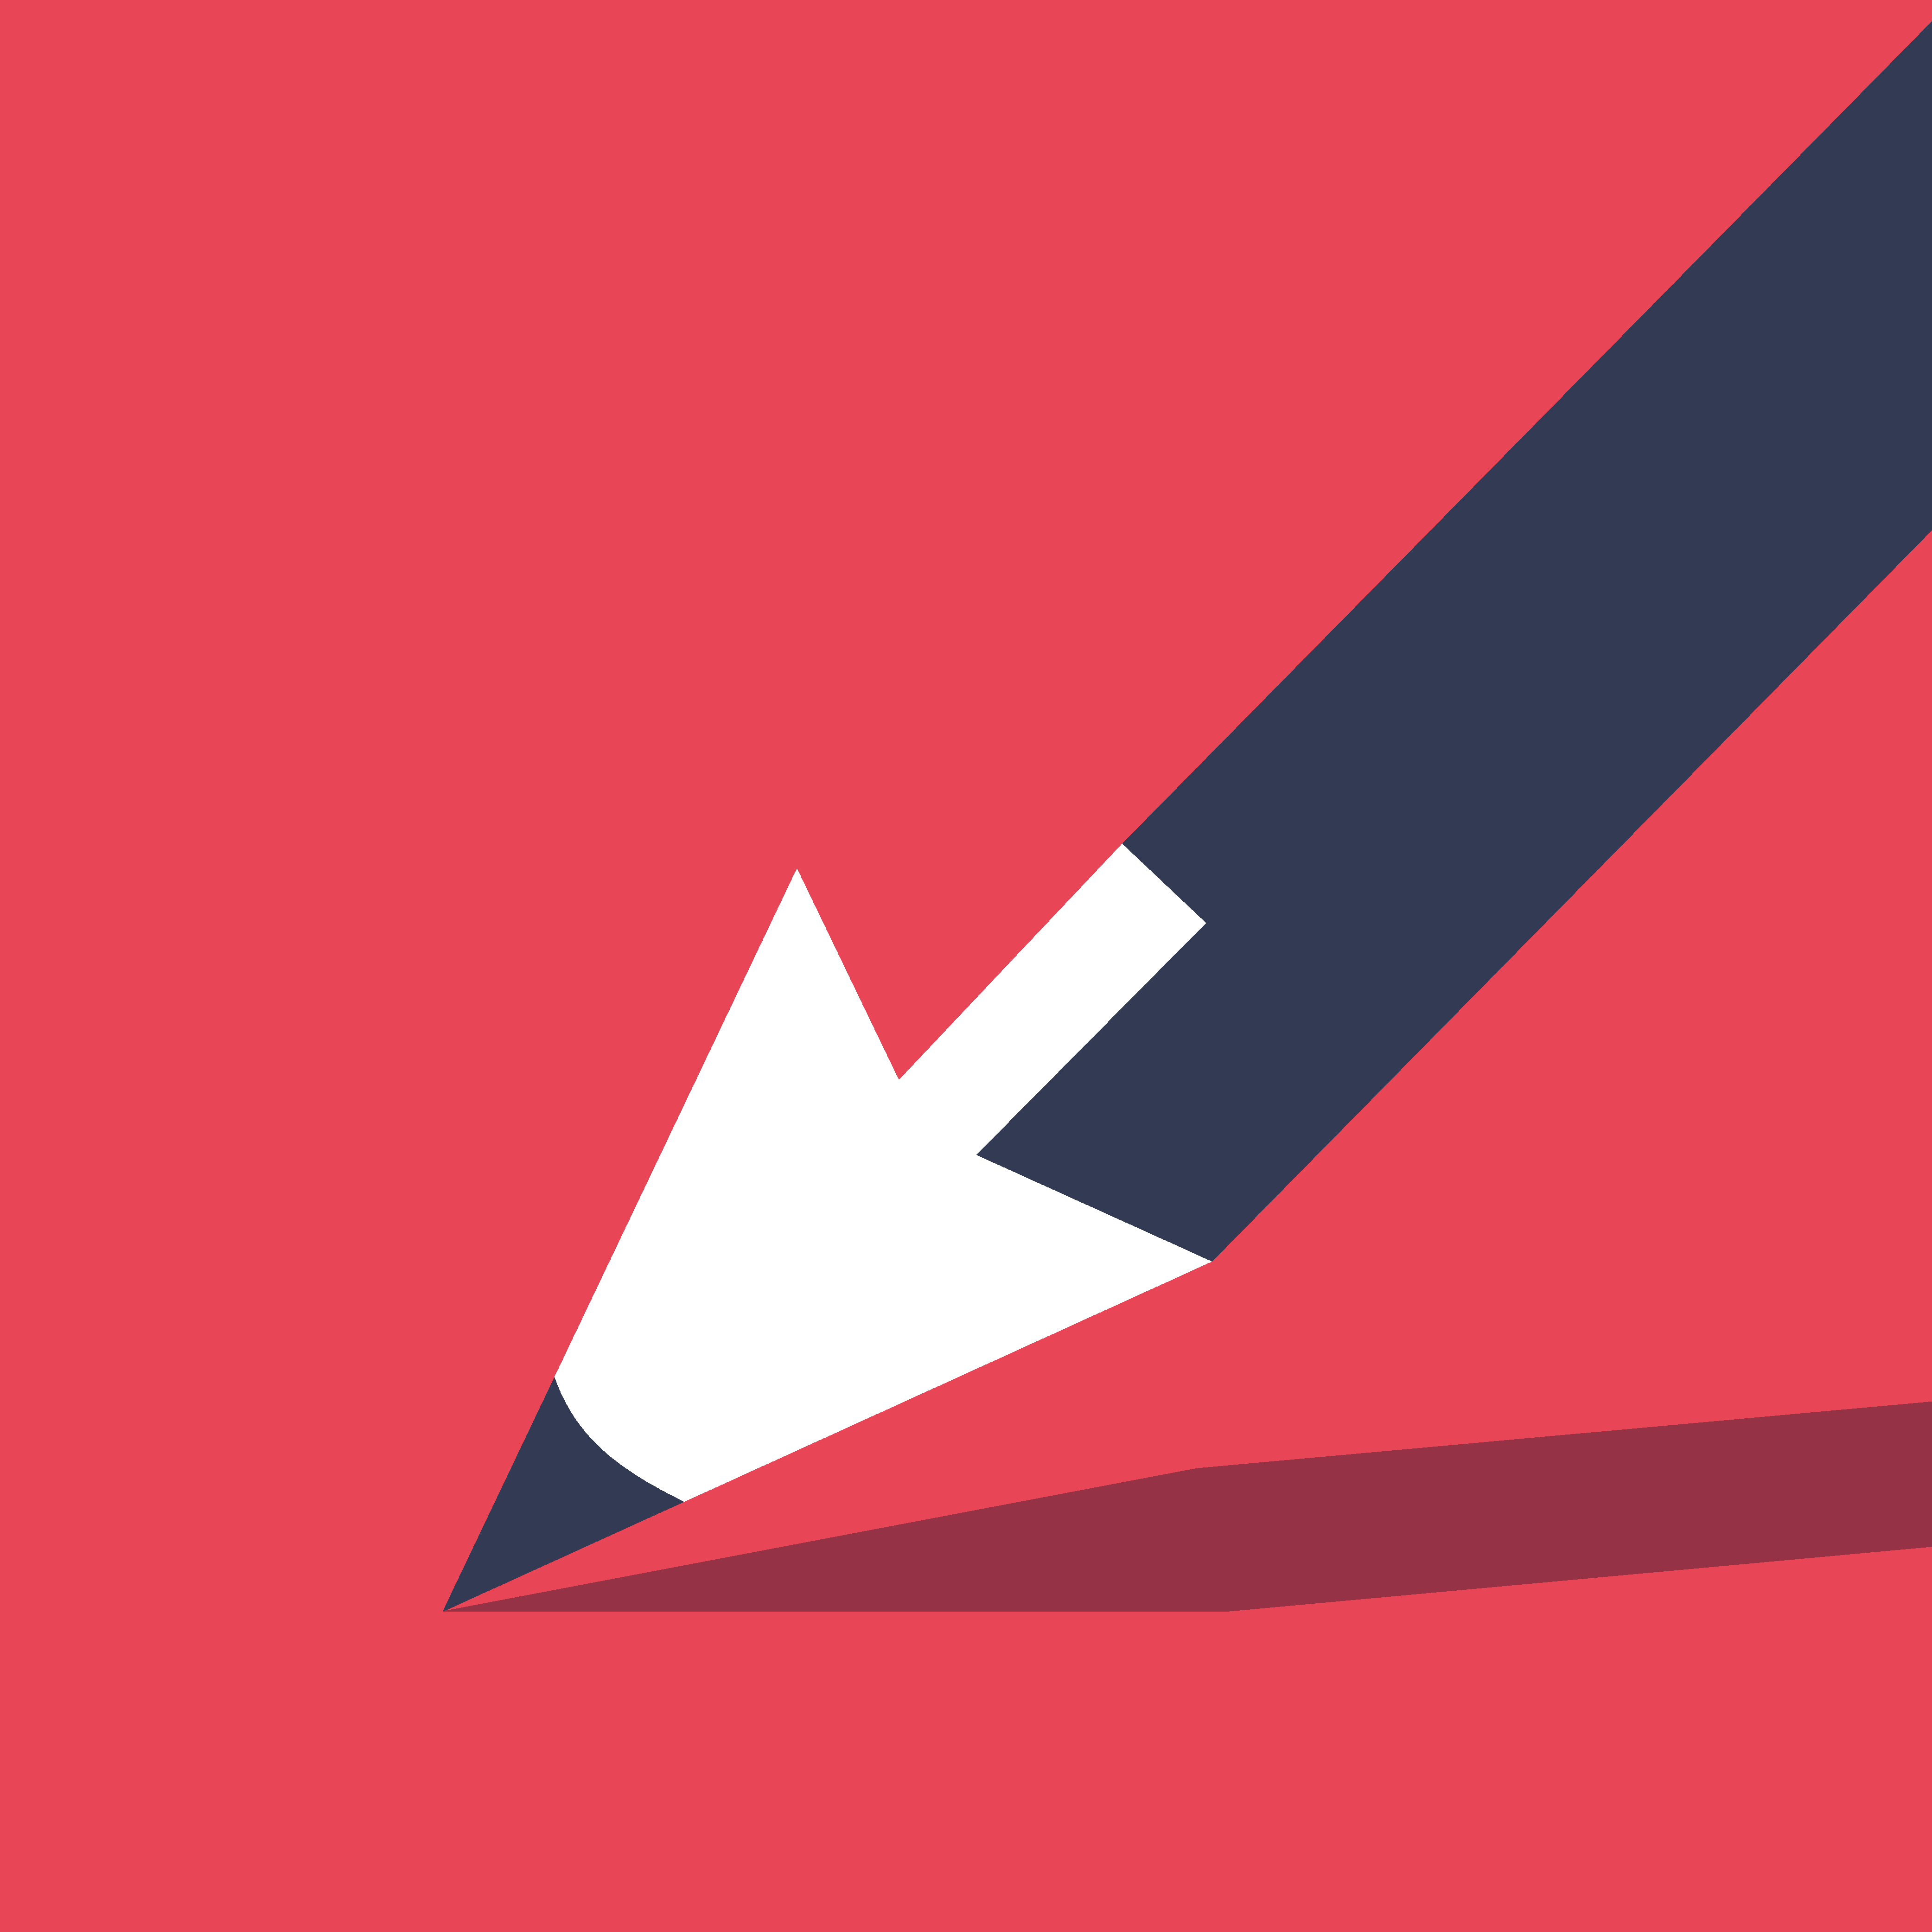 Minimalistic vector illustration of a computer mouse cursor as part of a pencil.